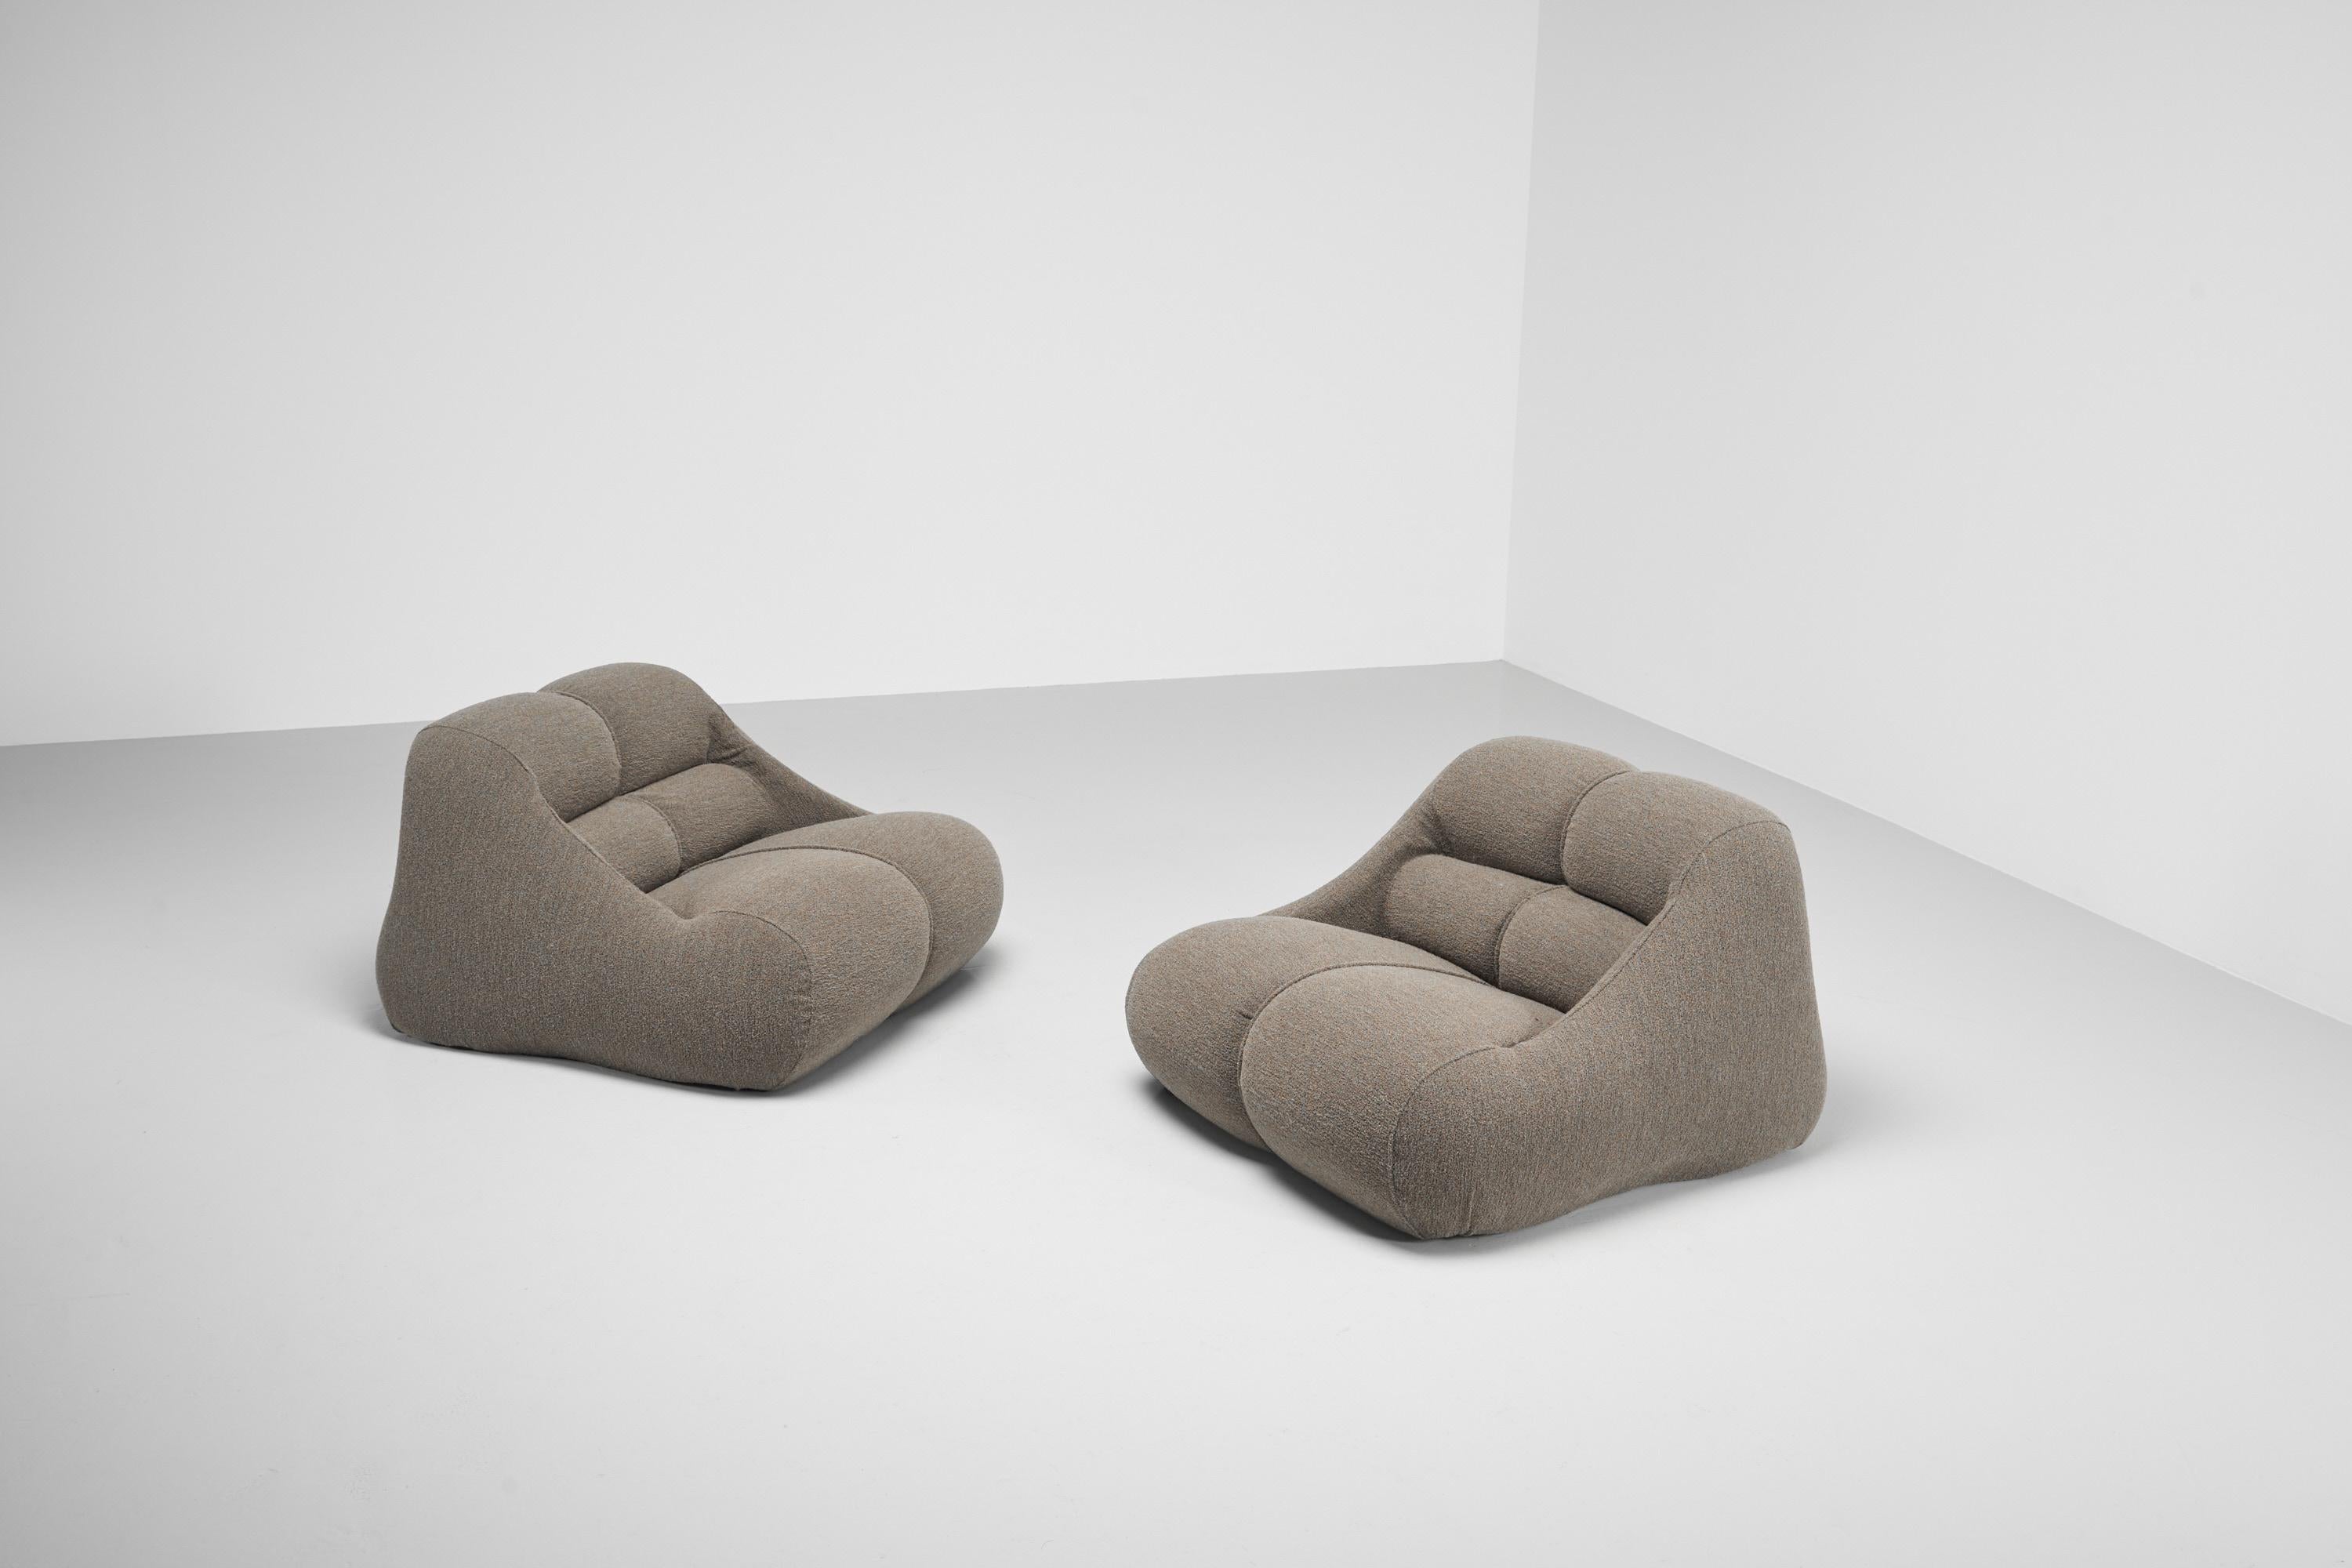 Super puffy shaped and highly comfortable so called Ciuingam lounge chairs designed by Jonathan DePas, Donato D'Urbino & Paolo Lomazzi and manufactured by BBB Bonacina, Italy 1967. This super puffy set of chairs is fully foam filled and has a